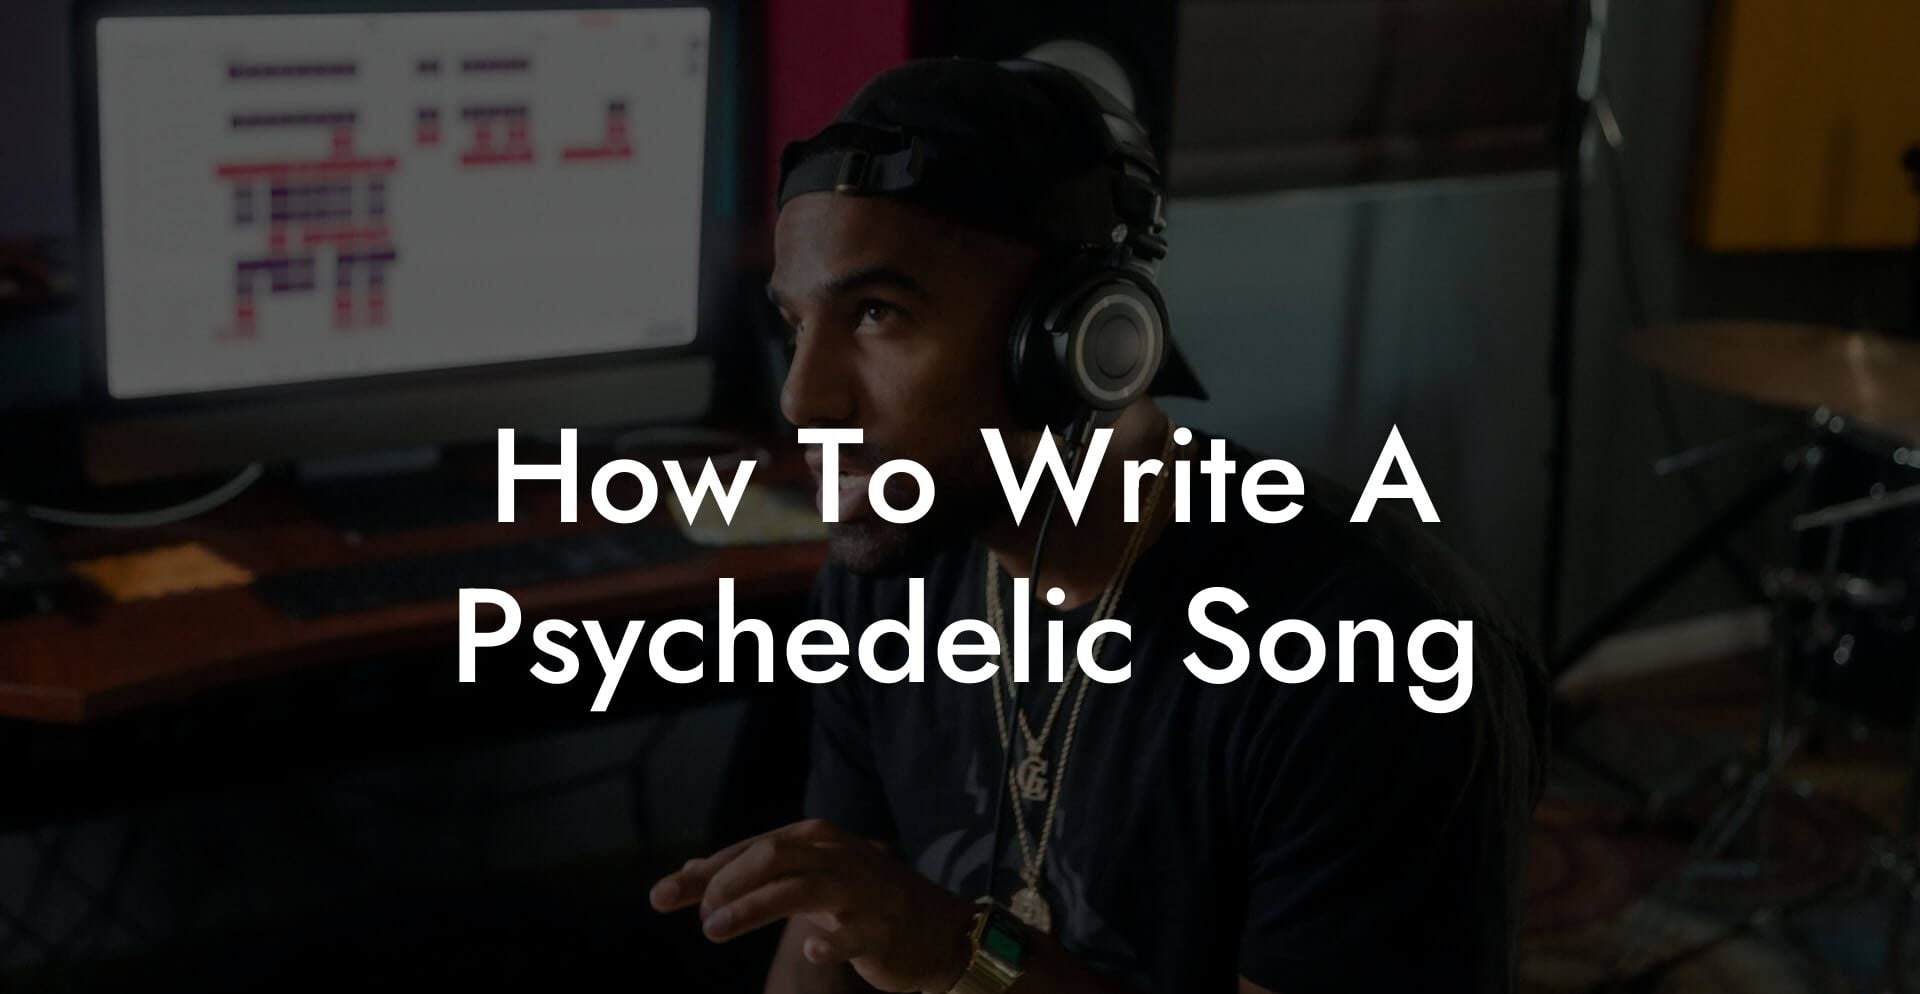 how to write a psychedelic song lyric assistant